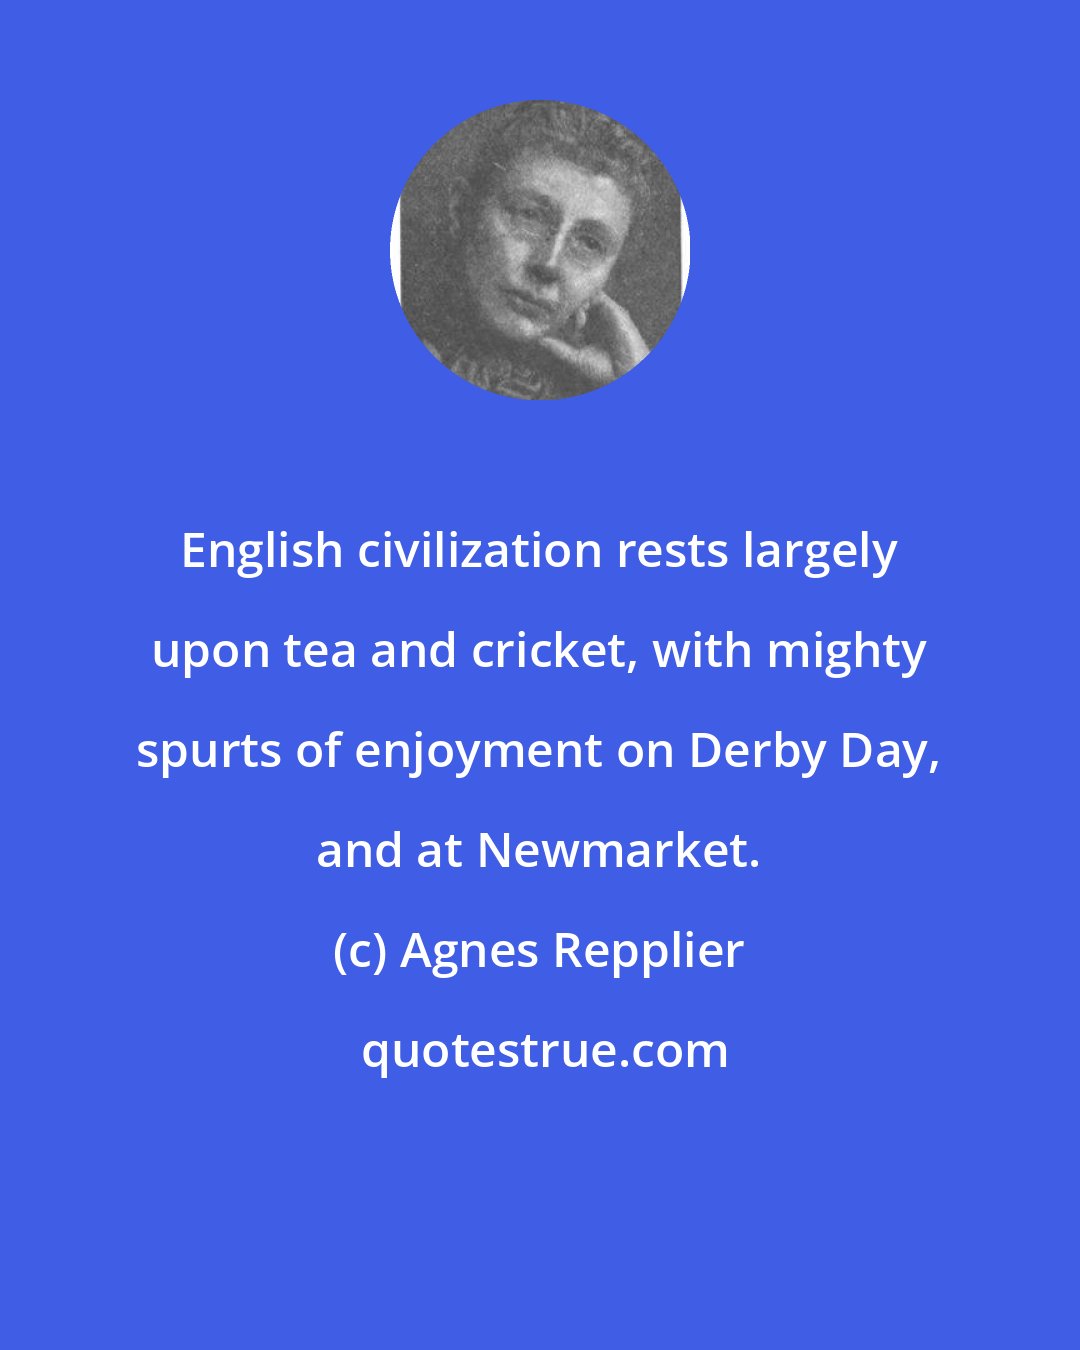 Agnes Repplier: English civilization rests largely upon tea and cricket, with mighty spurts of enjoyment on Derby Day, and at Newmarket.